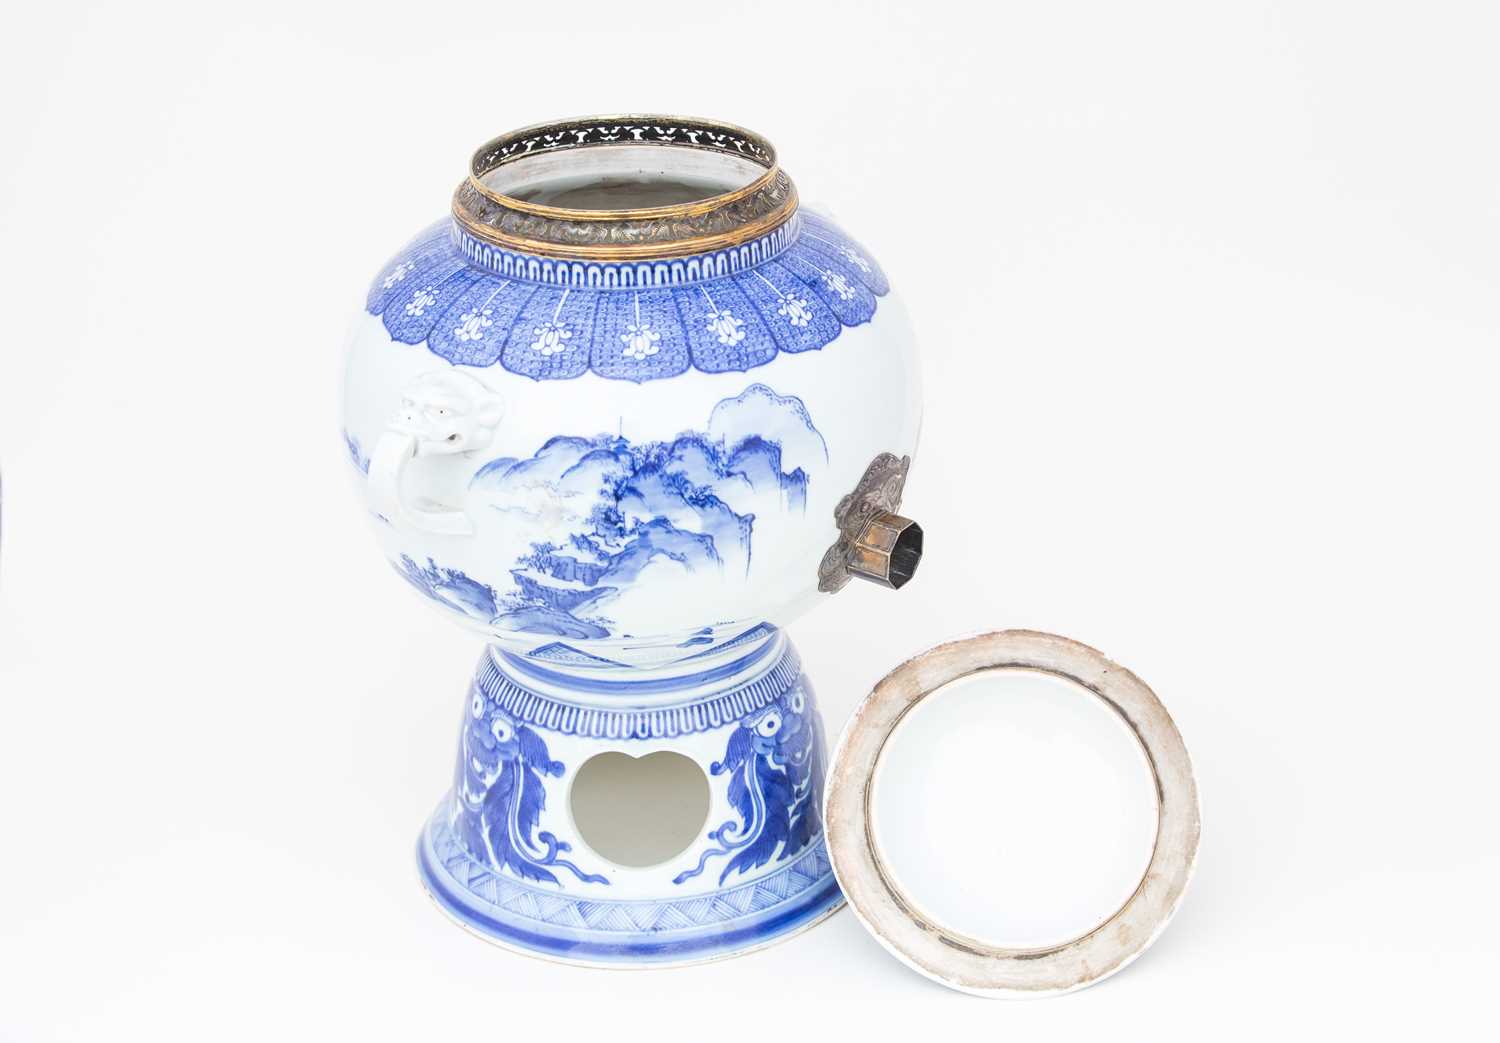 A Japanese Hirado blue & white cistern, 19th century, 日本，平户青花罐，十九世纪 the domed cover with dog of Fo - Image 5 of 6